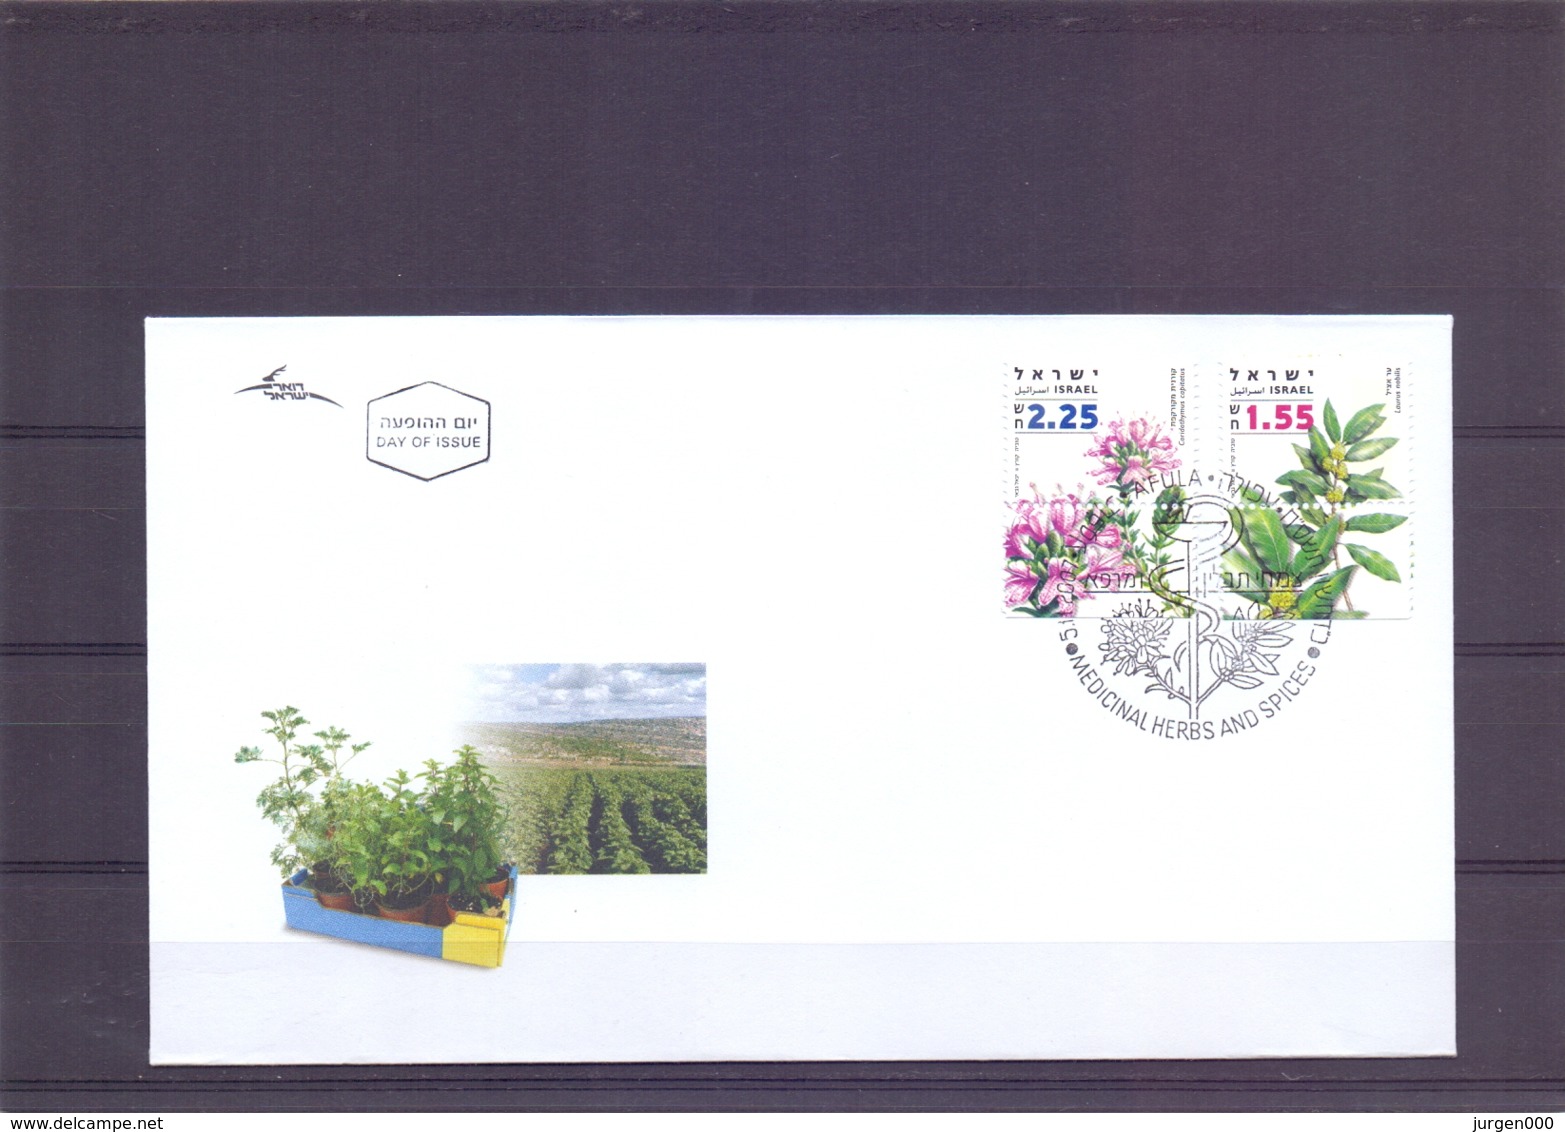 Israel - FDC - Medicinal Herbs And Spices - 5/11/2007   (RM14725) - Medicinal Plants